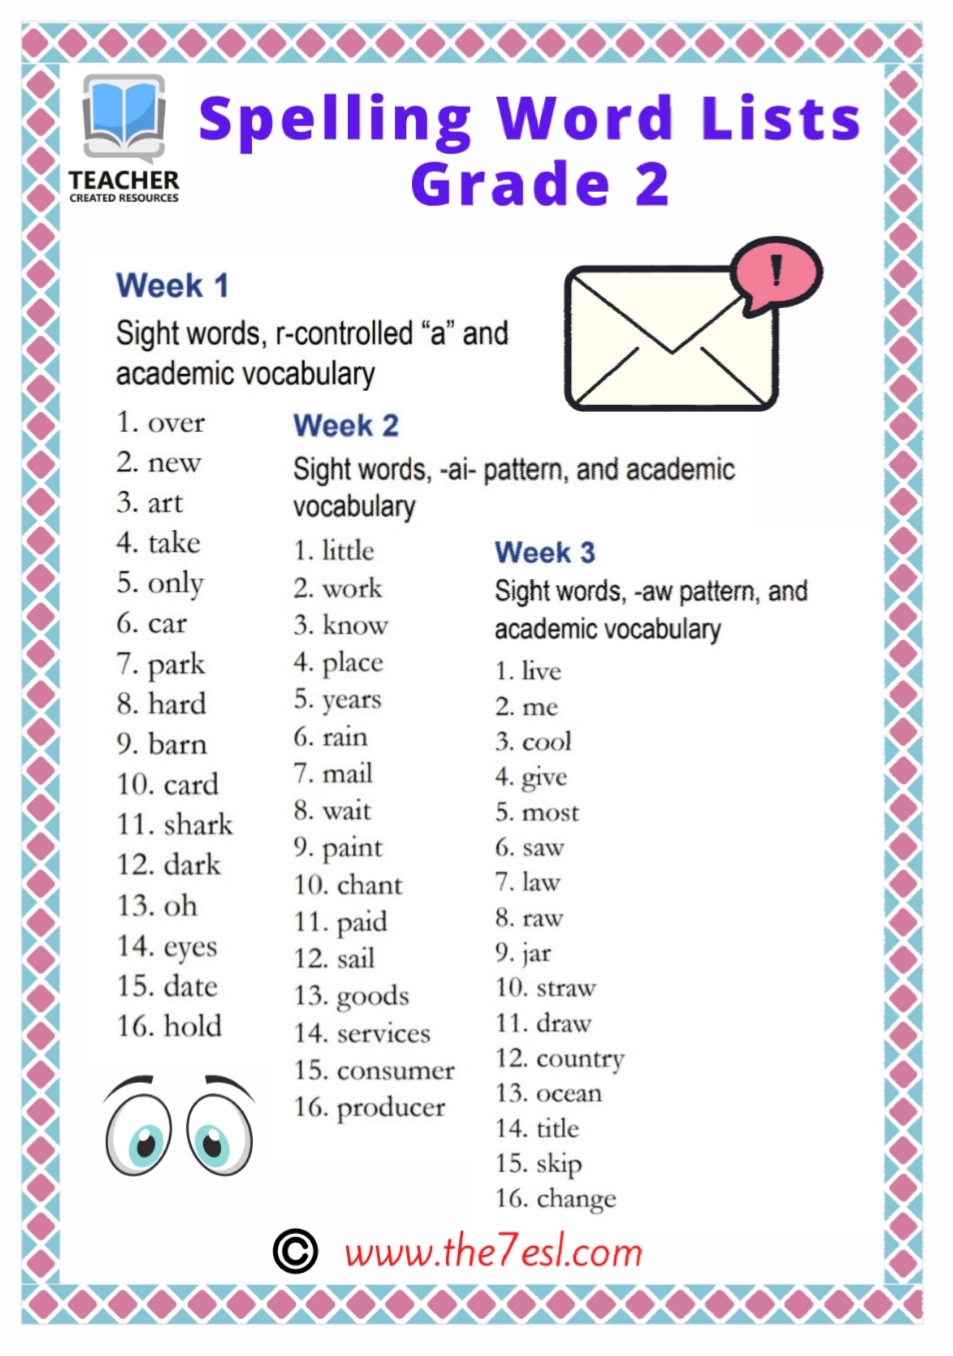 spelling-word-lists-grade-2-english-created-resources